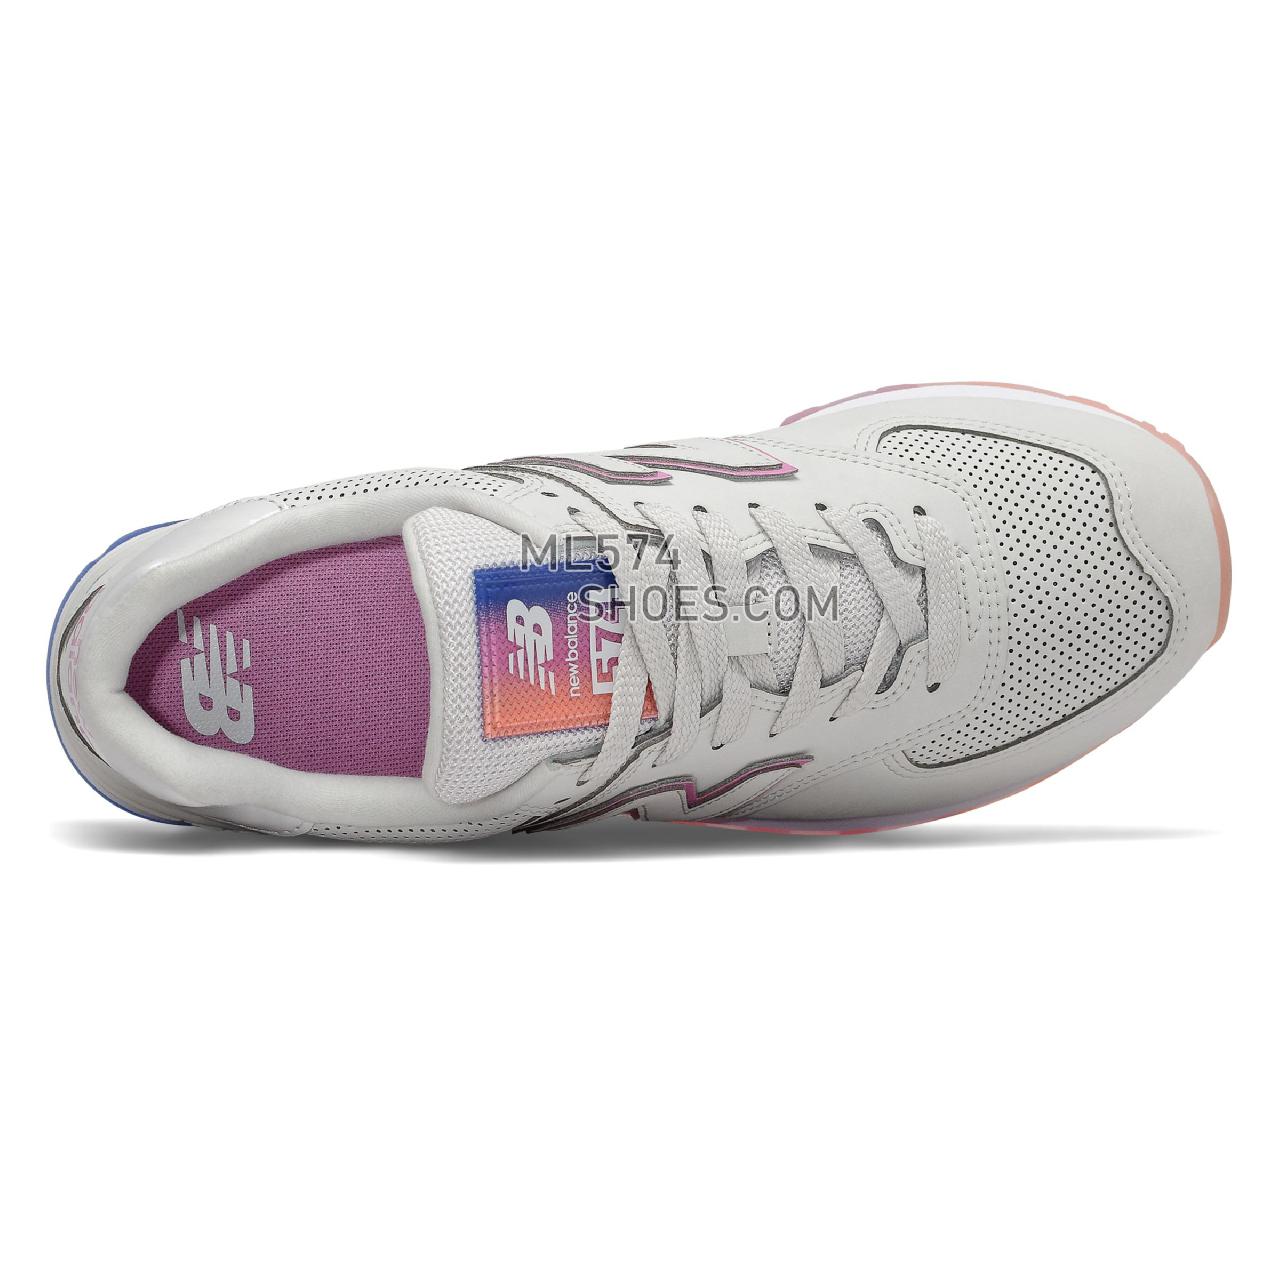 New Balance 574 - Women's Classic Sneakers - Linen Fog with Candy Pink - WL574SOL